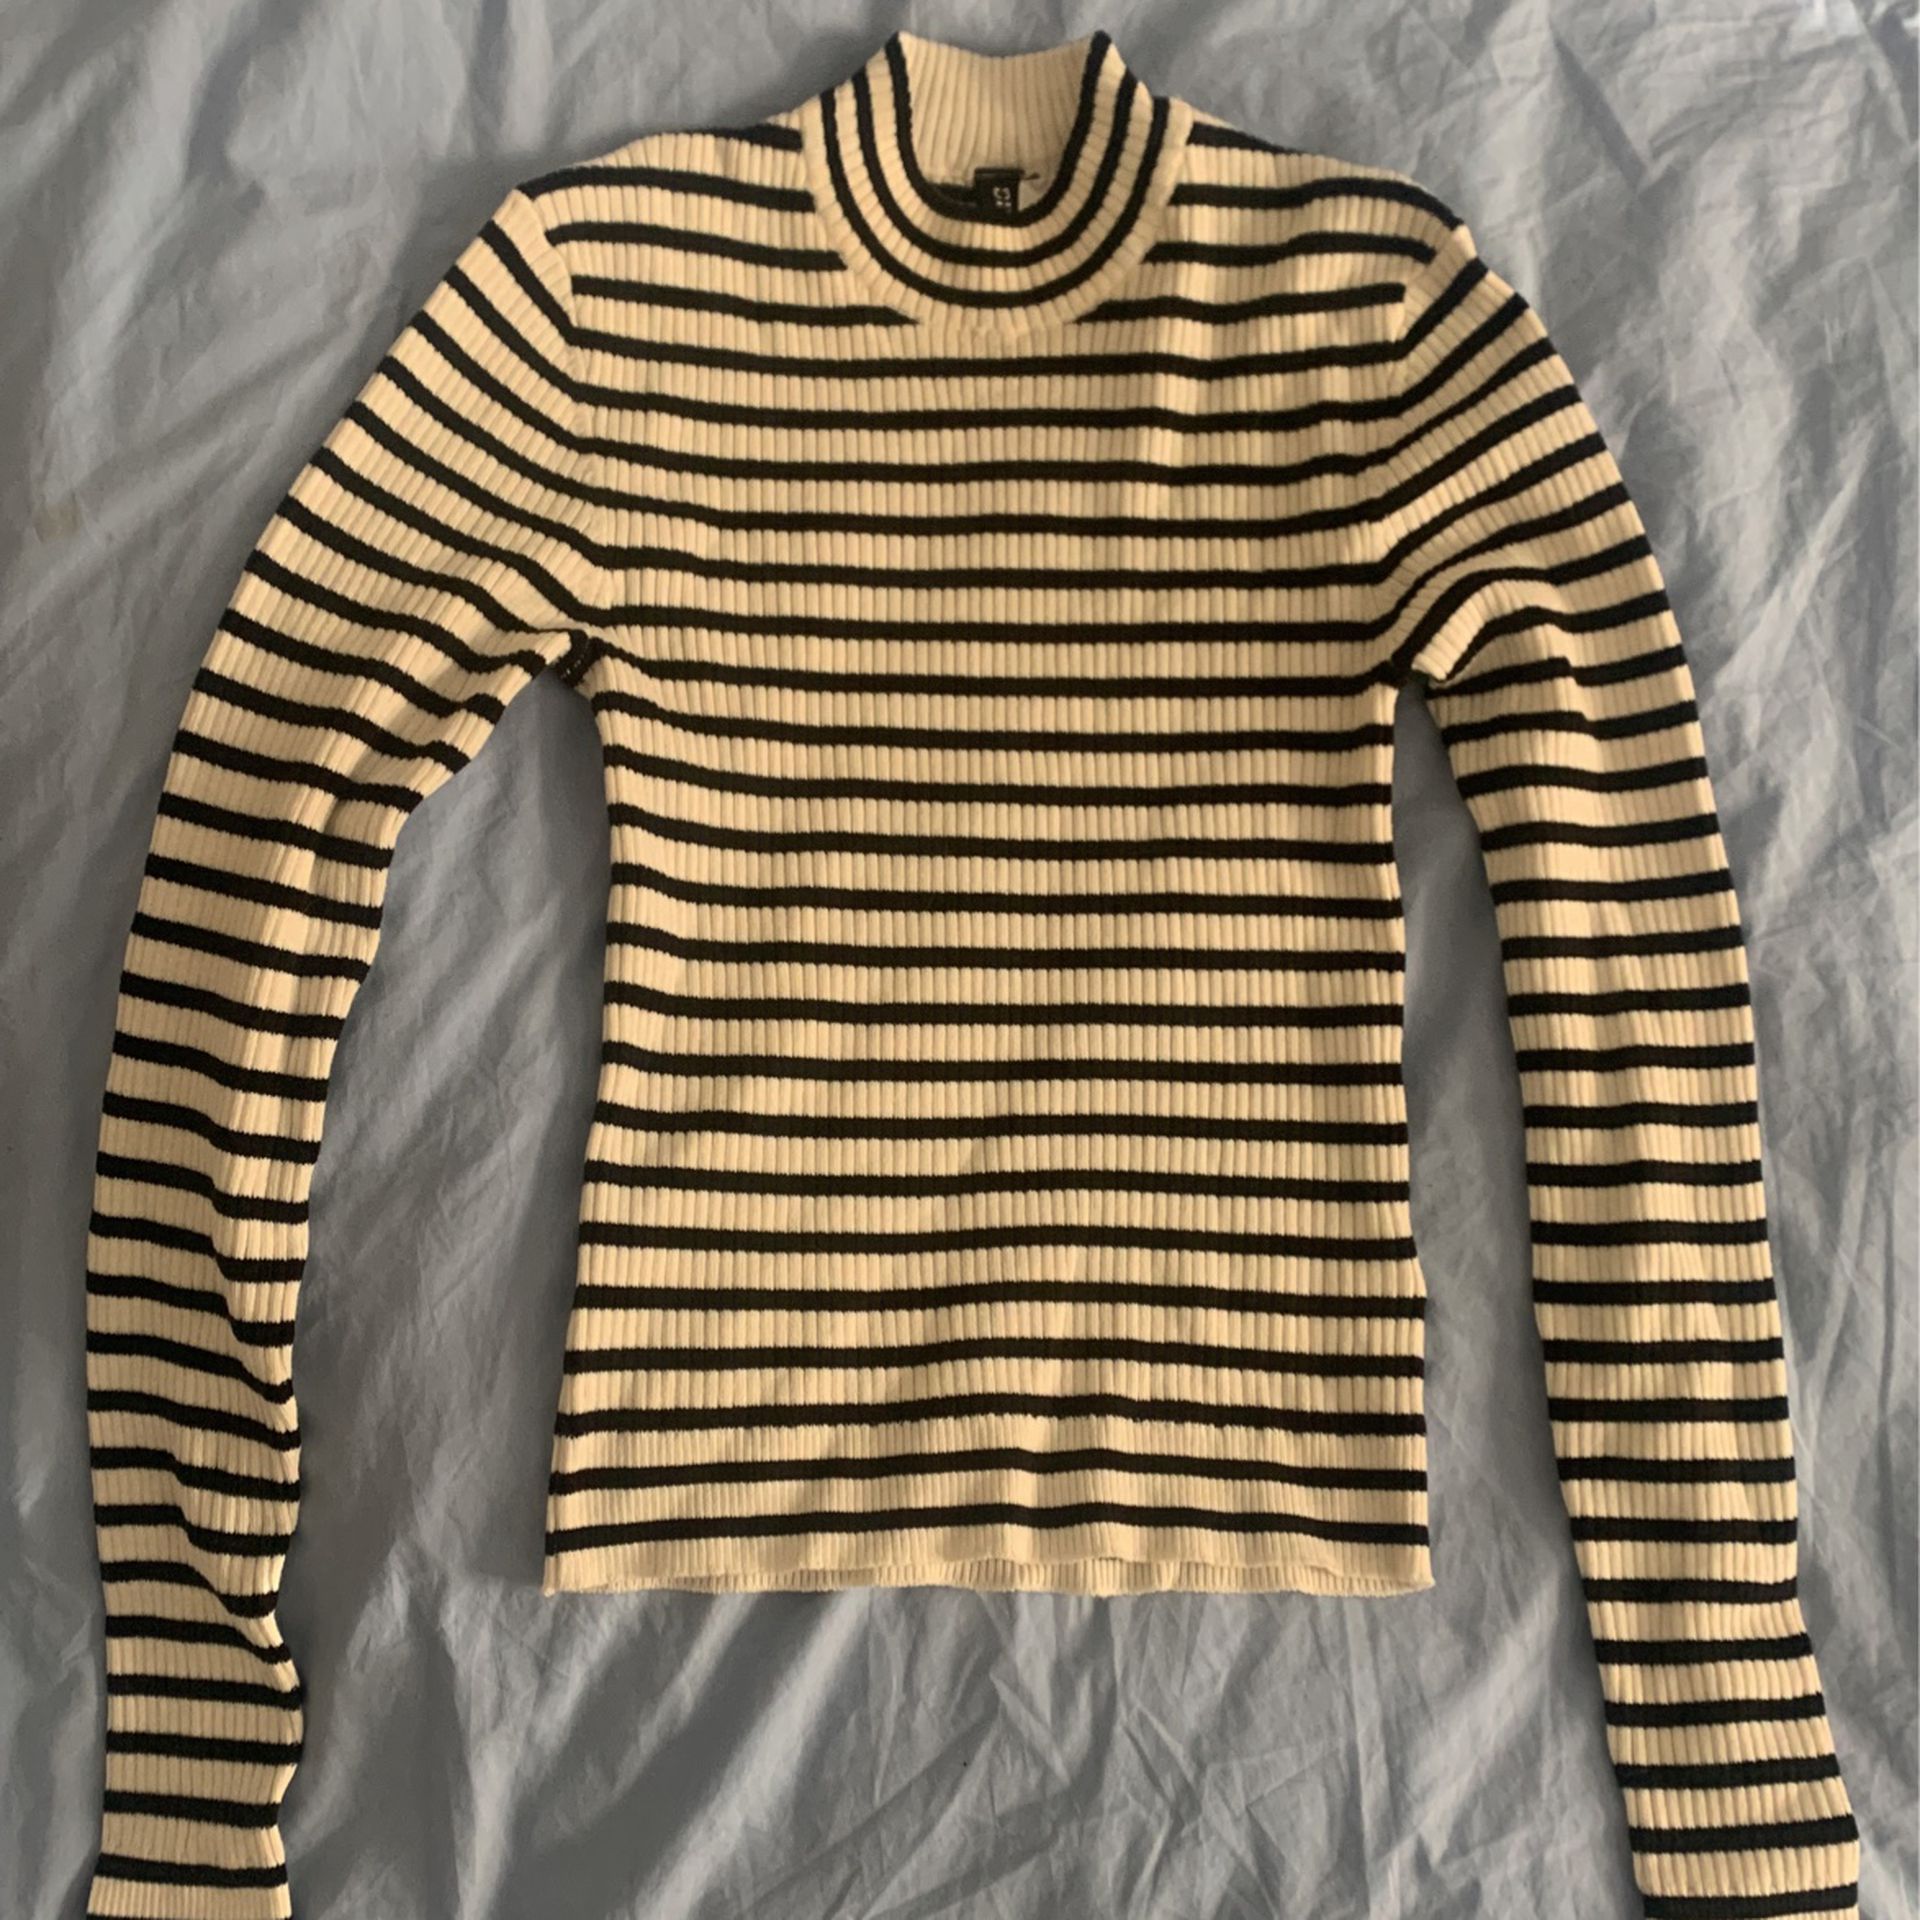 H&M long sleeve stripped top